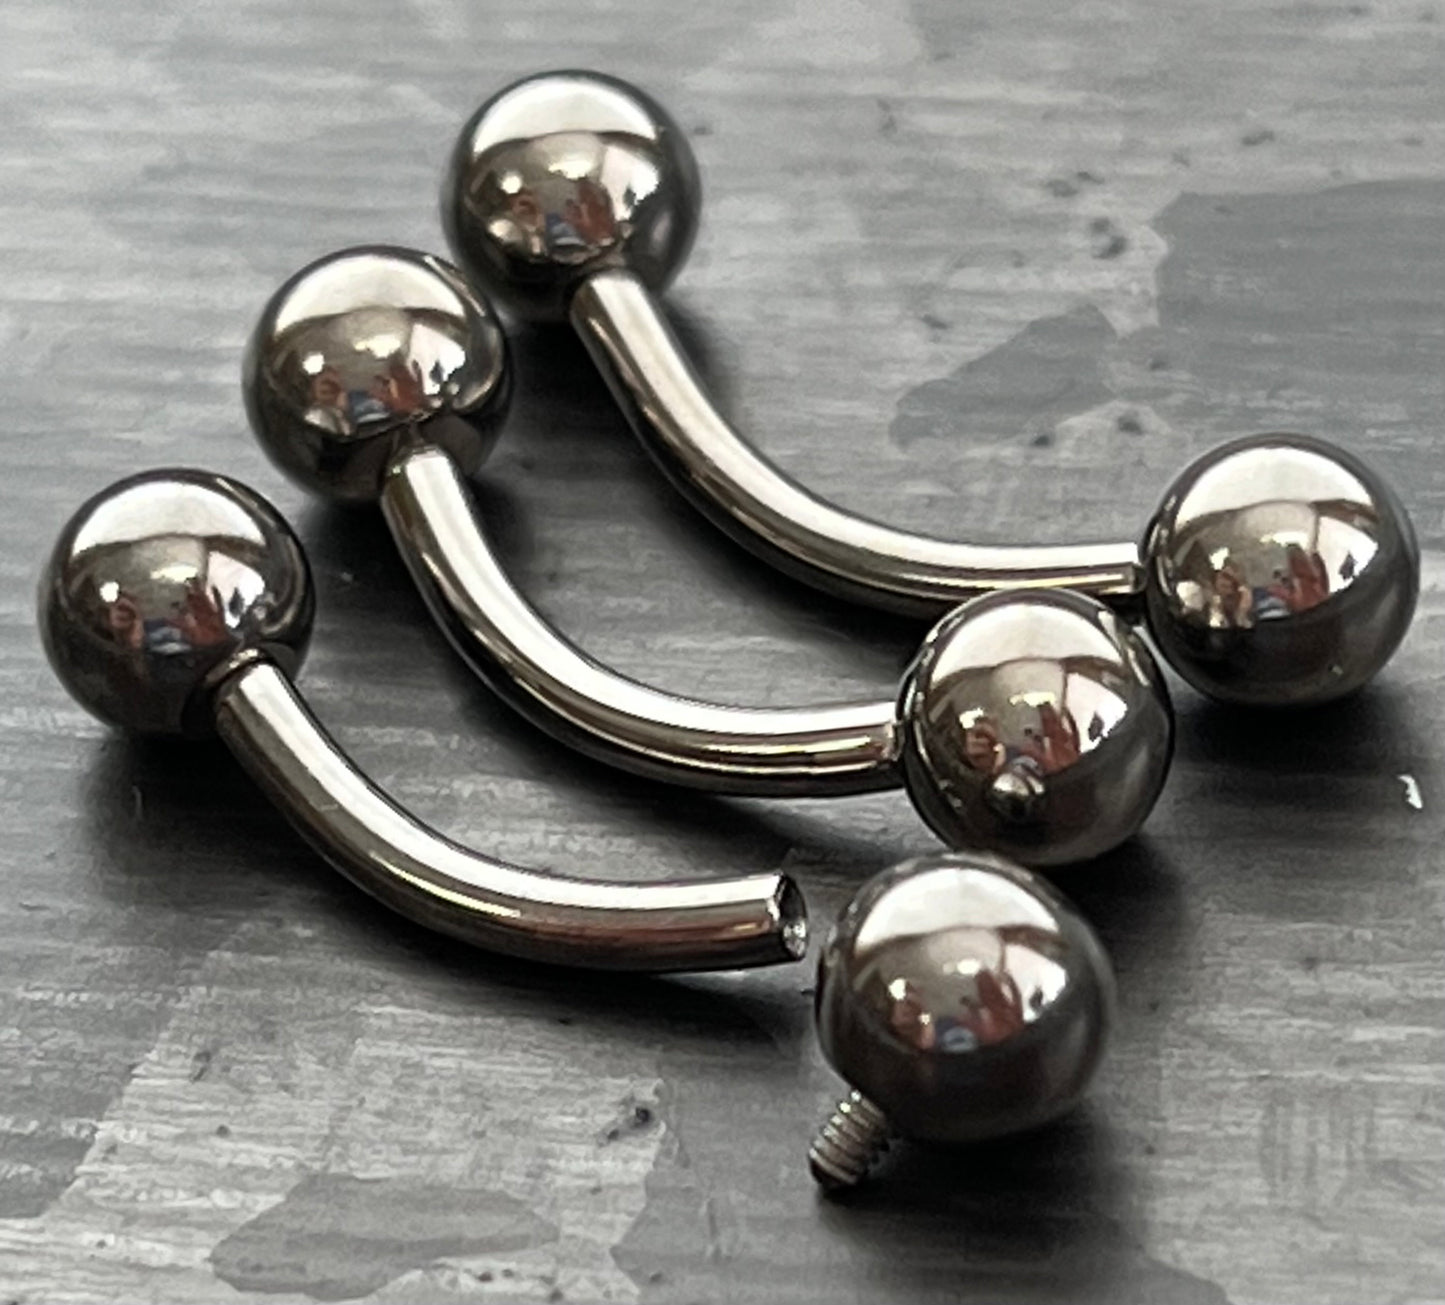 1 Piece Grade 23 Solid Titanium Internally Threaded Curved Barbell / Eyebrow Ring - 16g or 14g - Different Ball Size and Lengths Available!